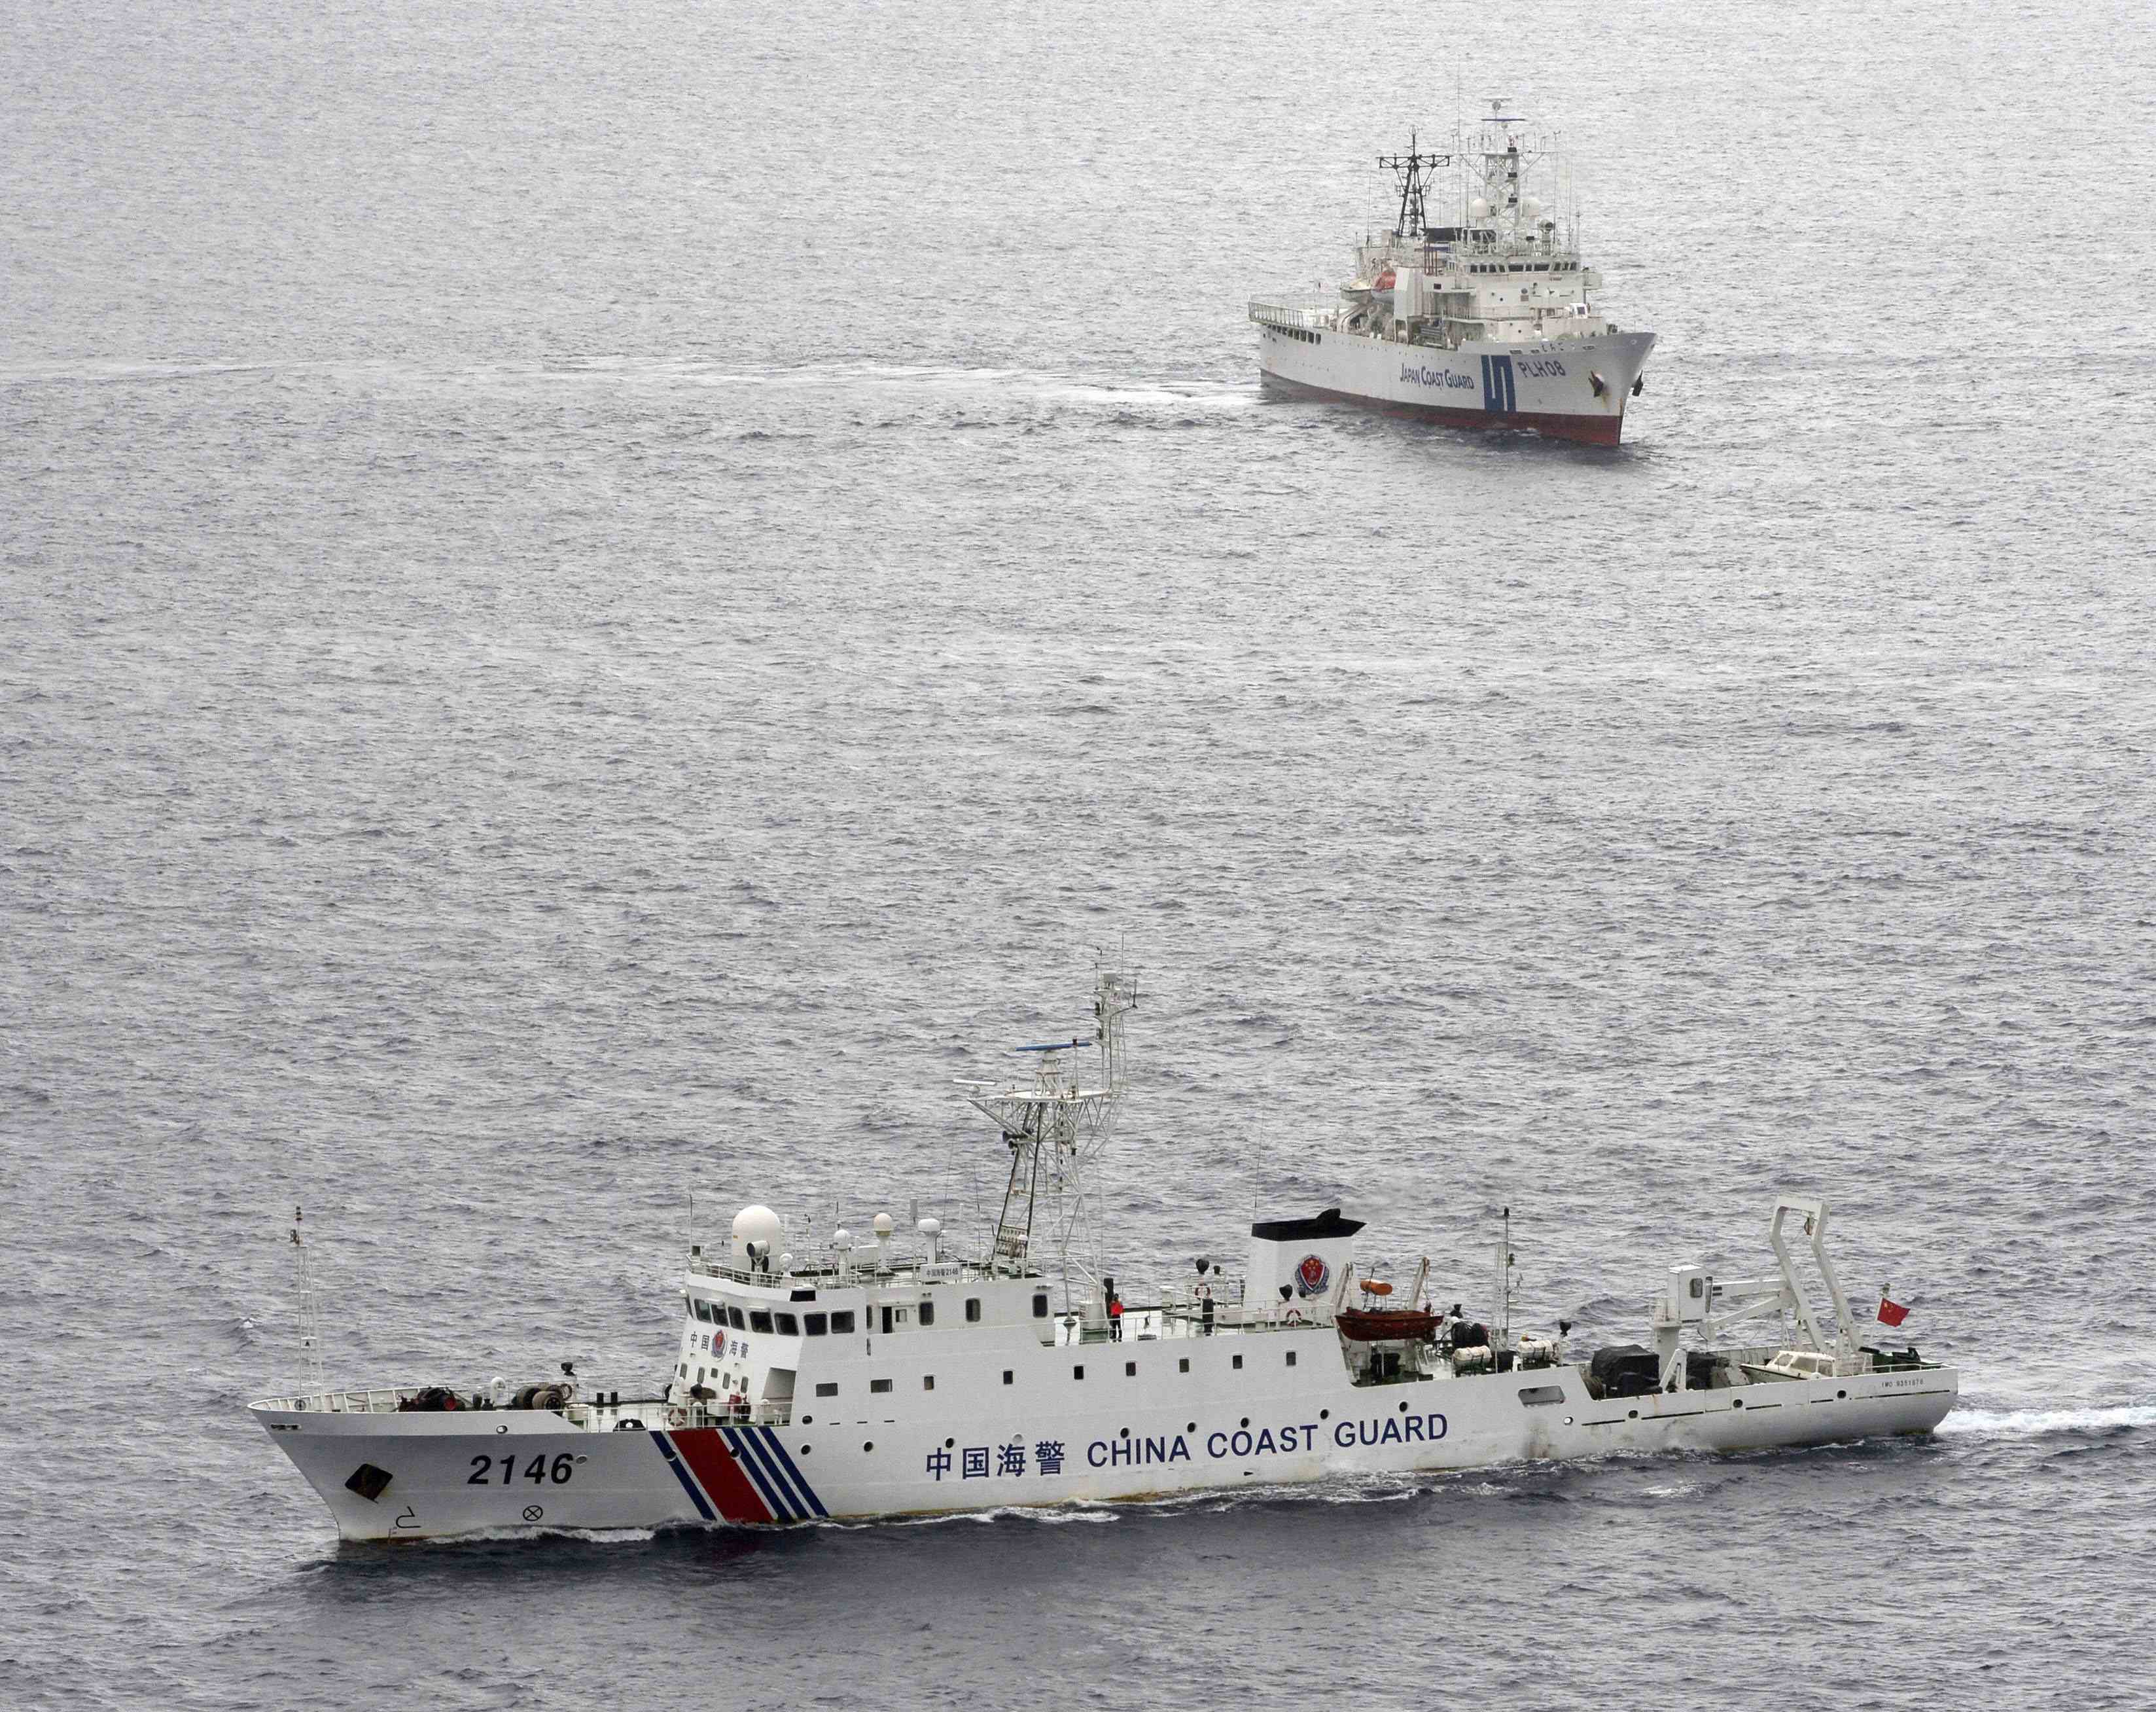 Japan nationalists return after nearing islands disputed with China